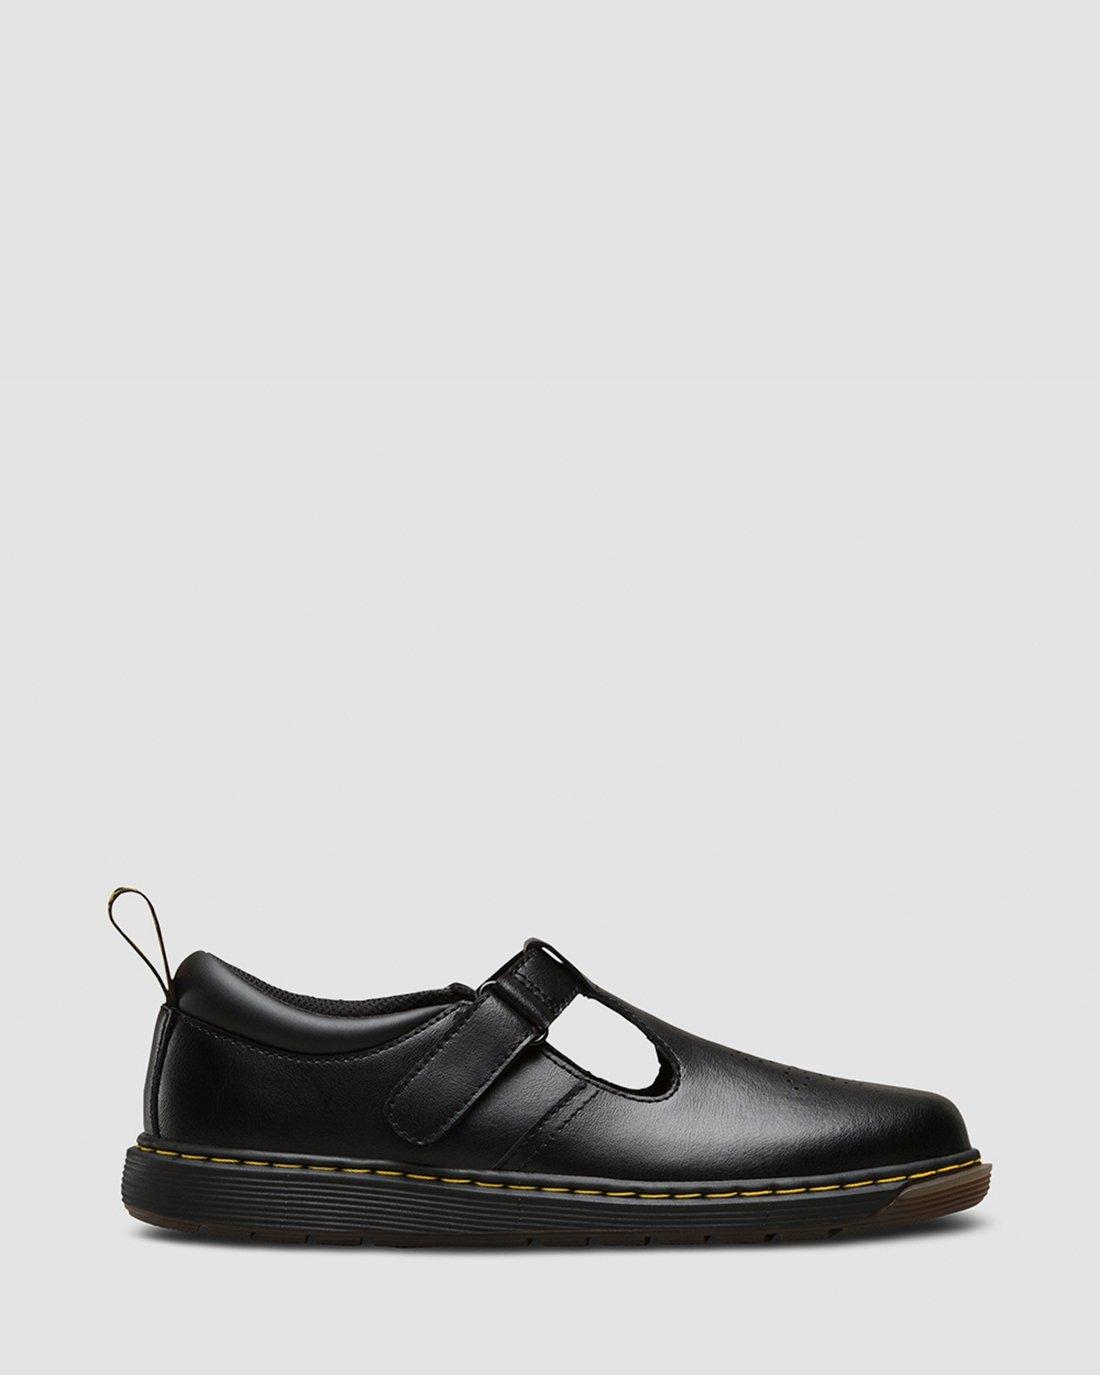 Youth Dulice | Dr. Martens